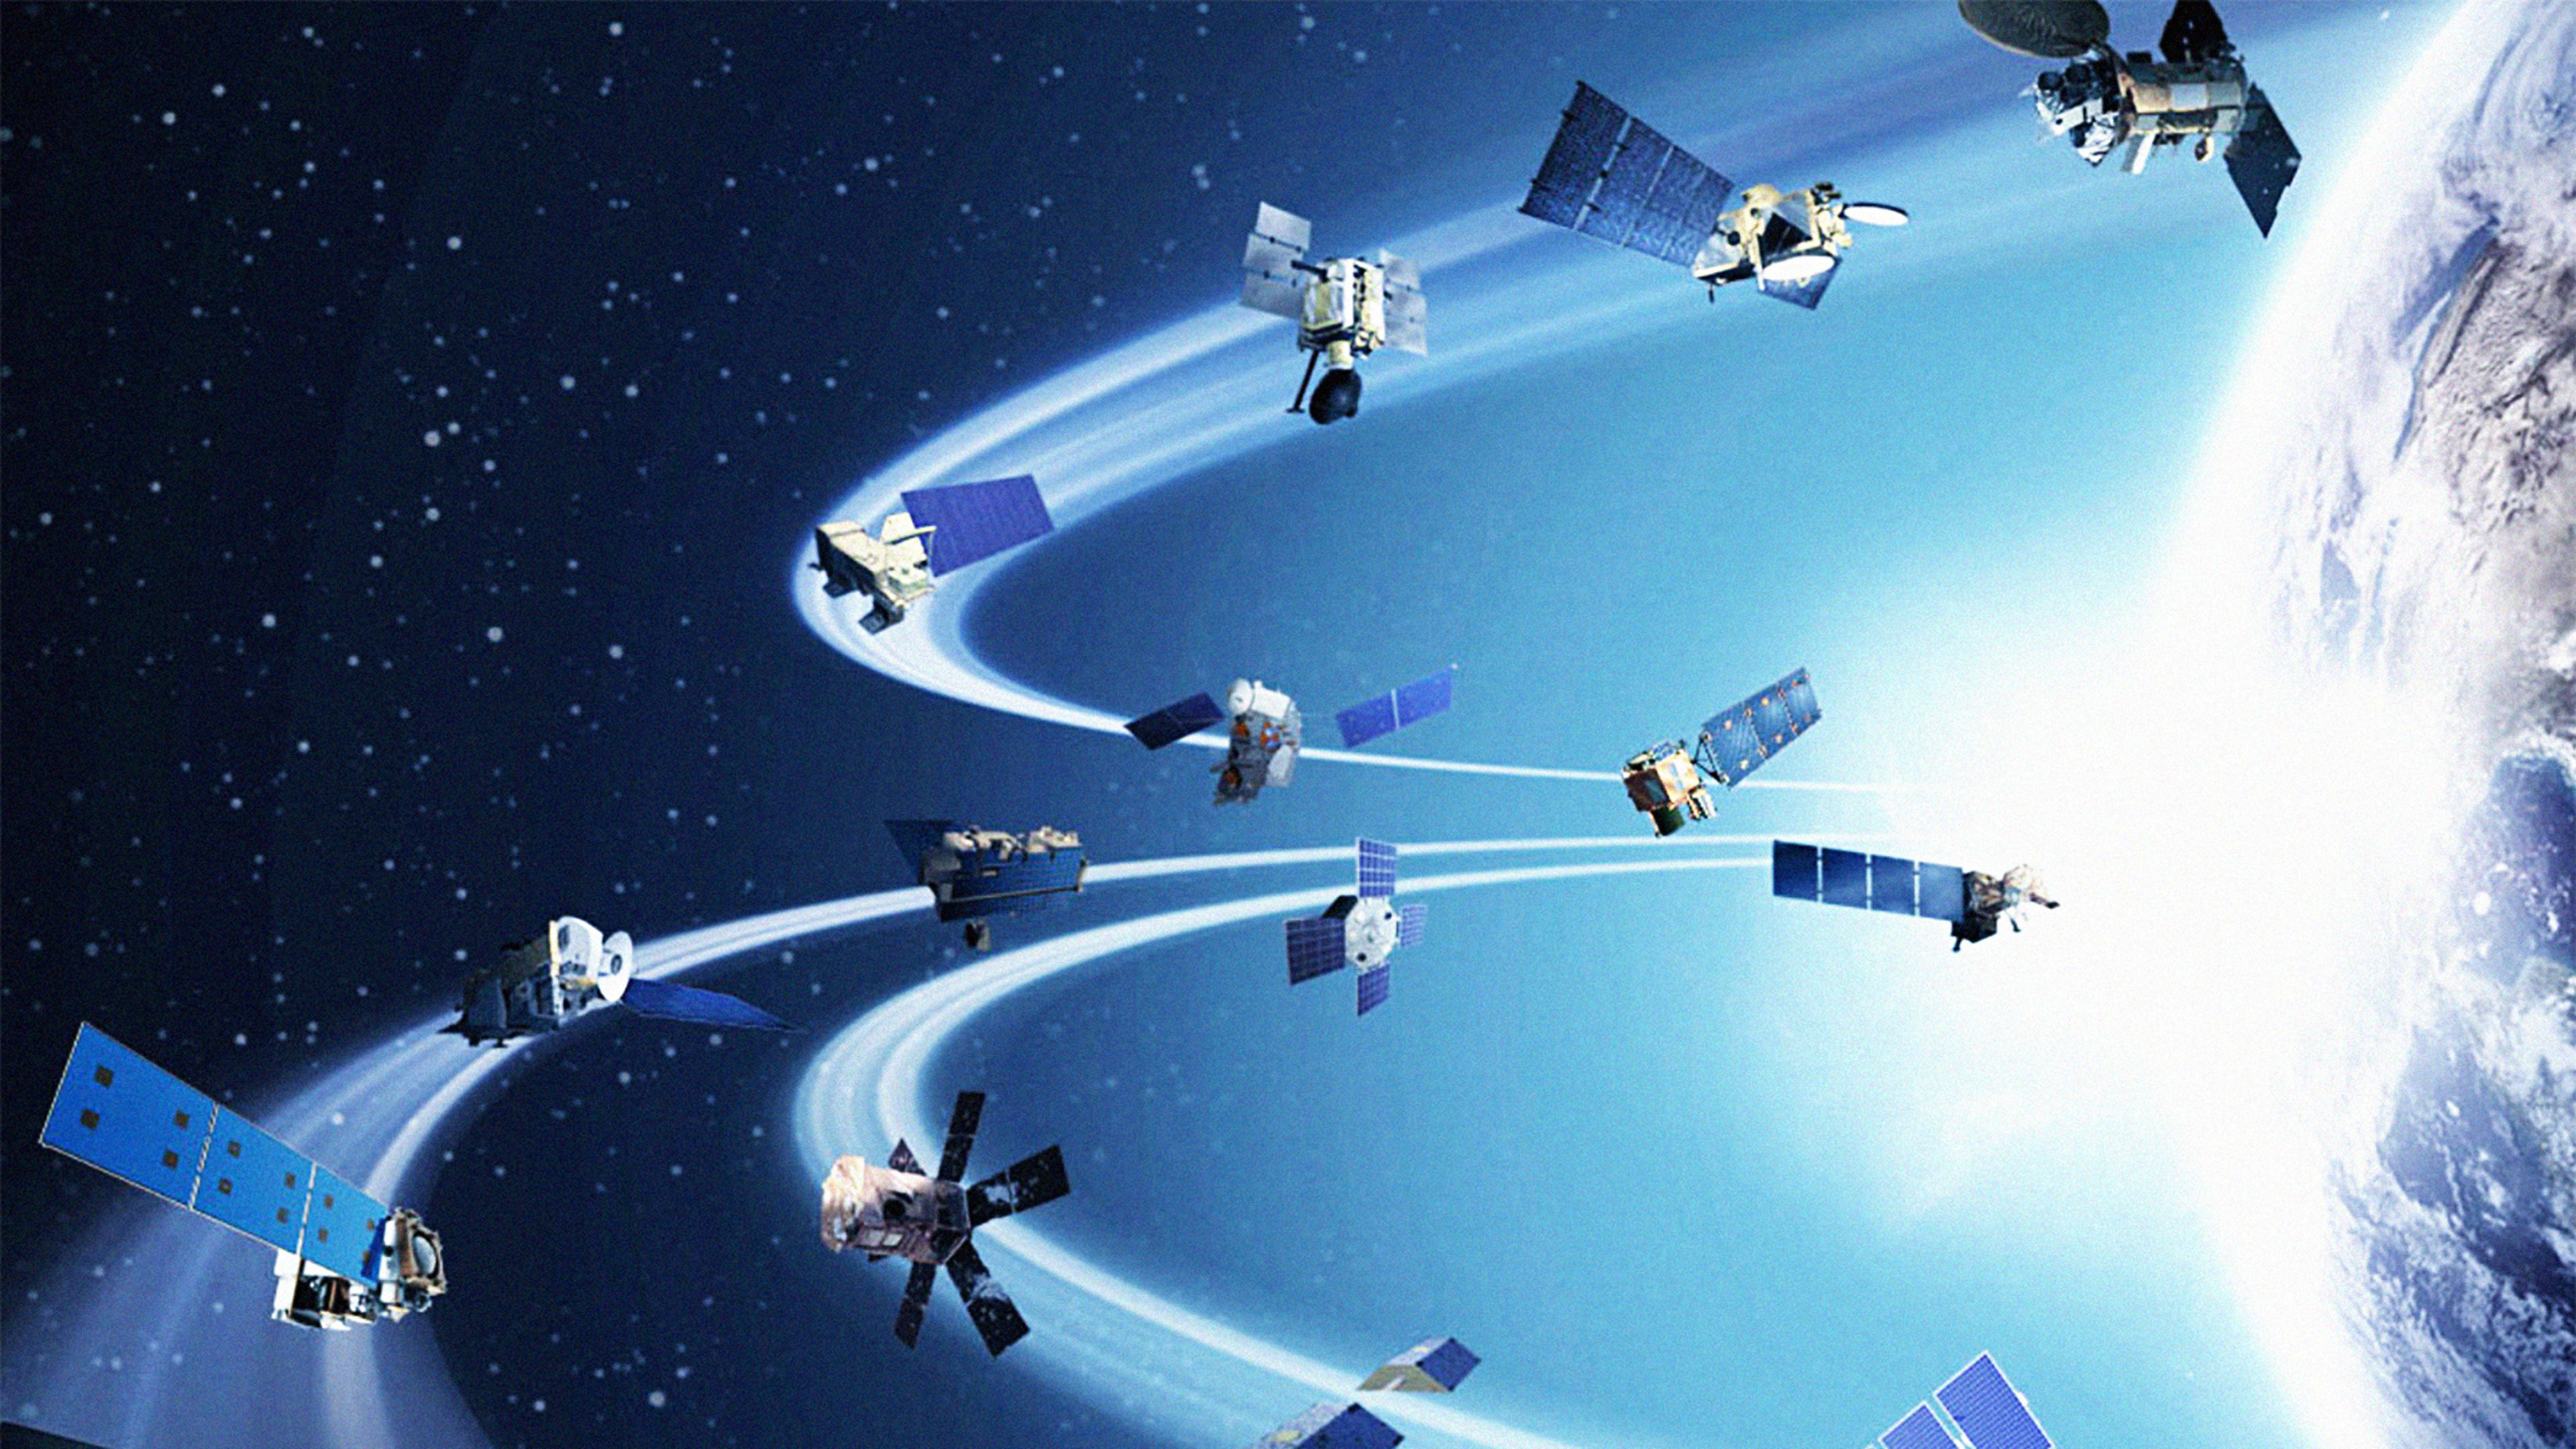 This New Wave Of Satellite Broadband Could Challenge Cable And Fiber